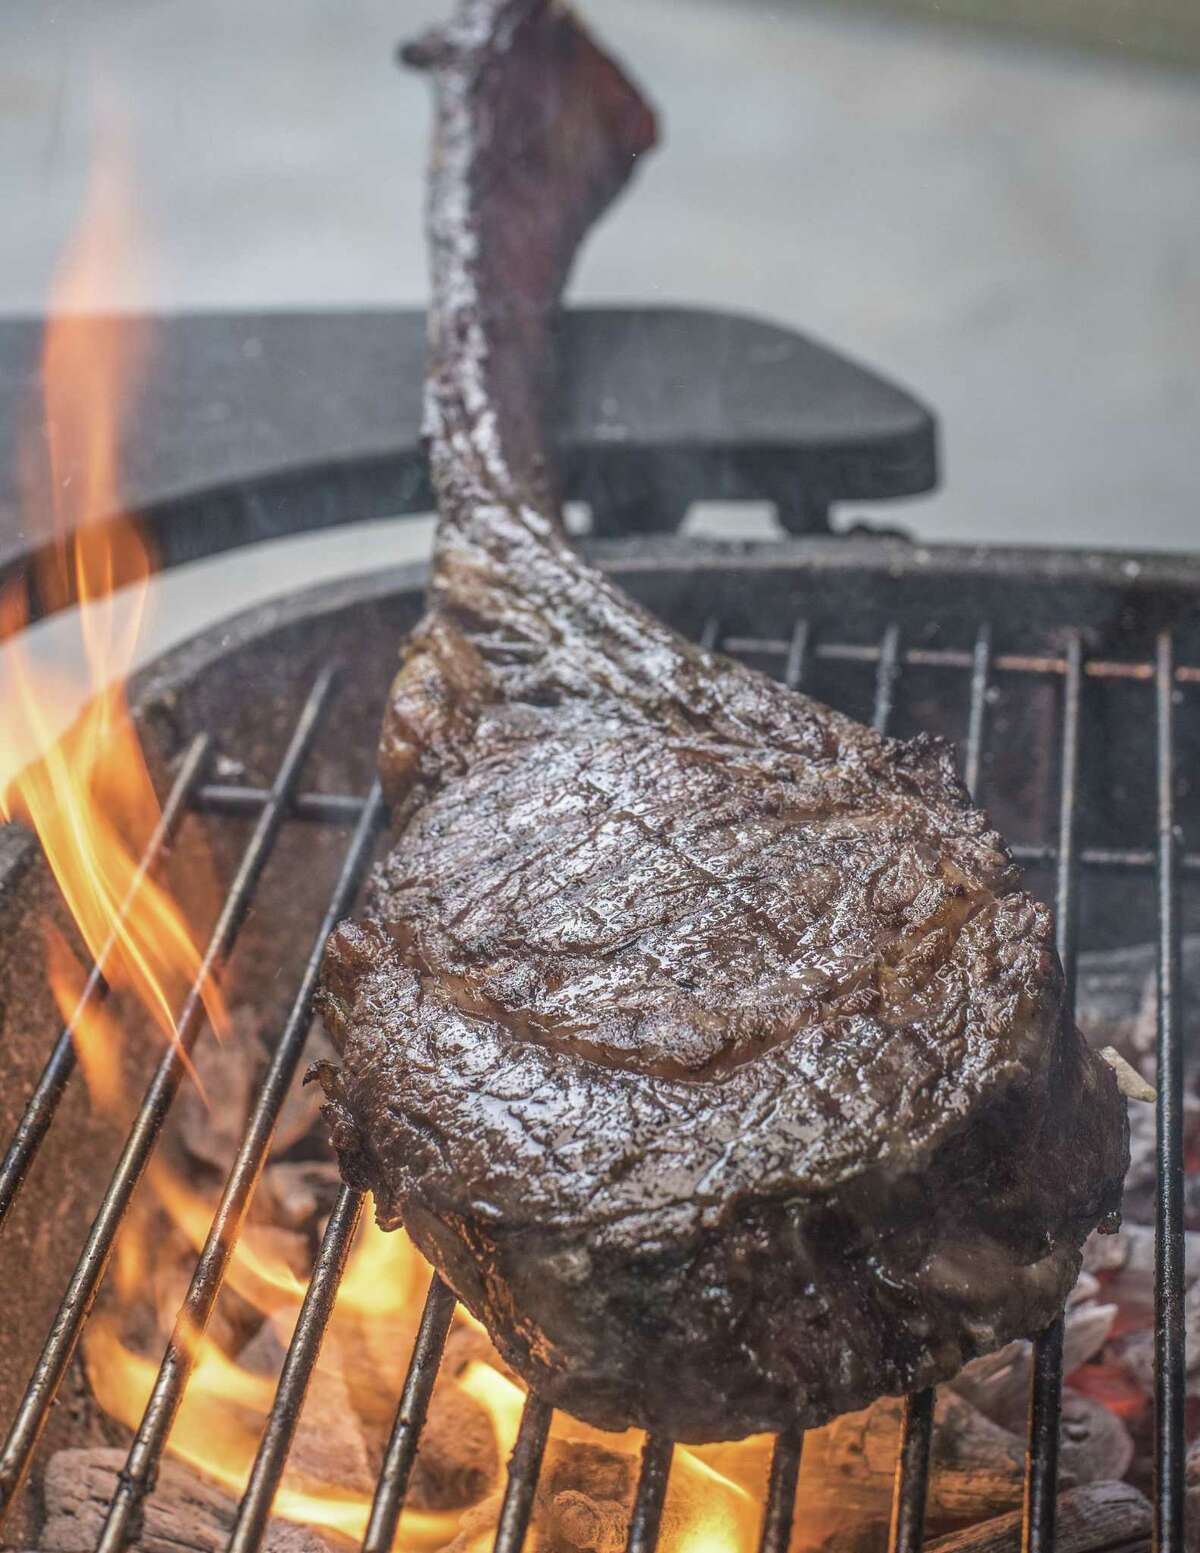 "Franklin Steak" by Aaron Franklin and Jordan Mackay is a new guide for cooking a perfect steak.